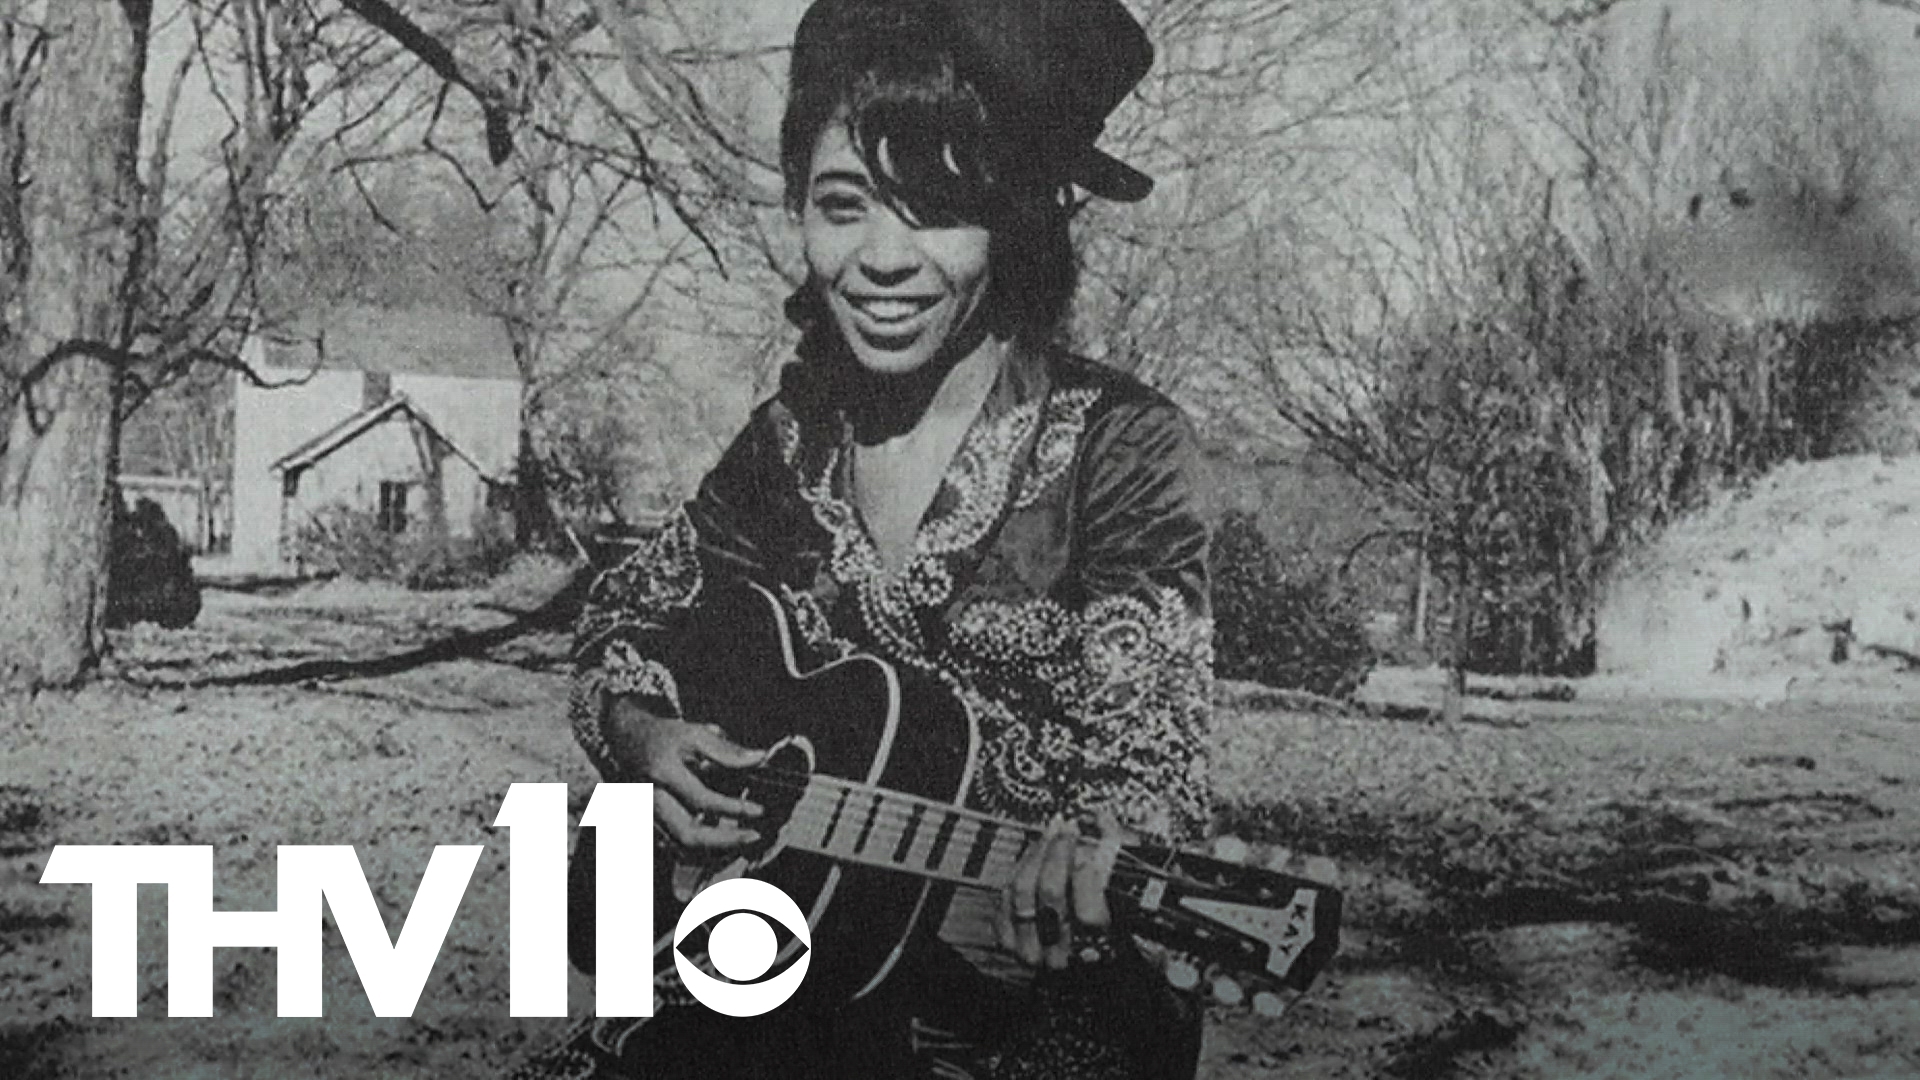 Beyoncé roped in criticism with “Cowboy Carter,” with some saying she doesn’t belong in the genre. Here’s how African American culture helped shape country music.